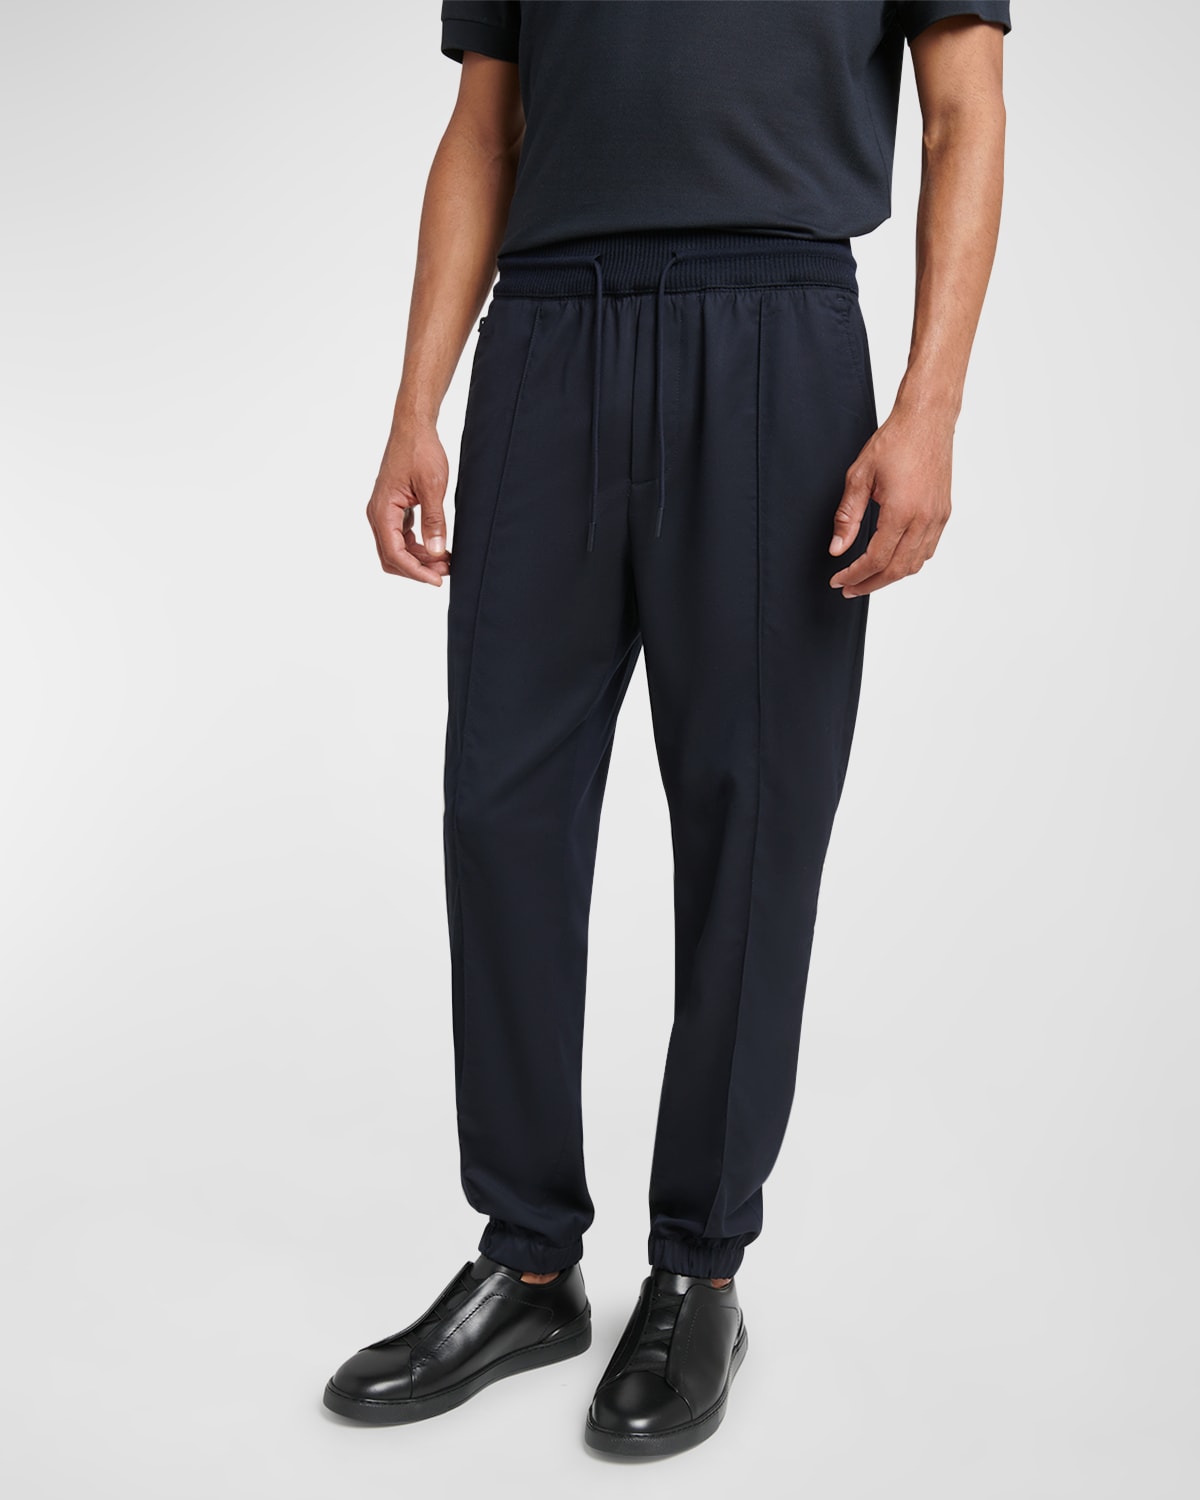 Zegna Men's Drawstring Trousers In Navy Solid